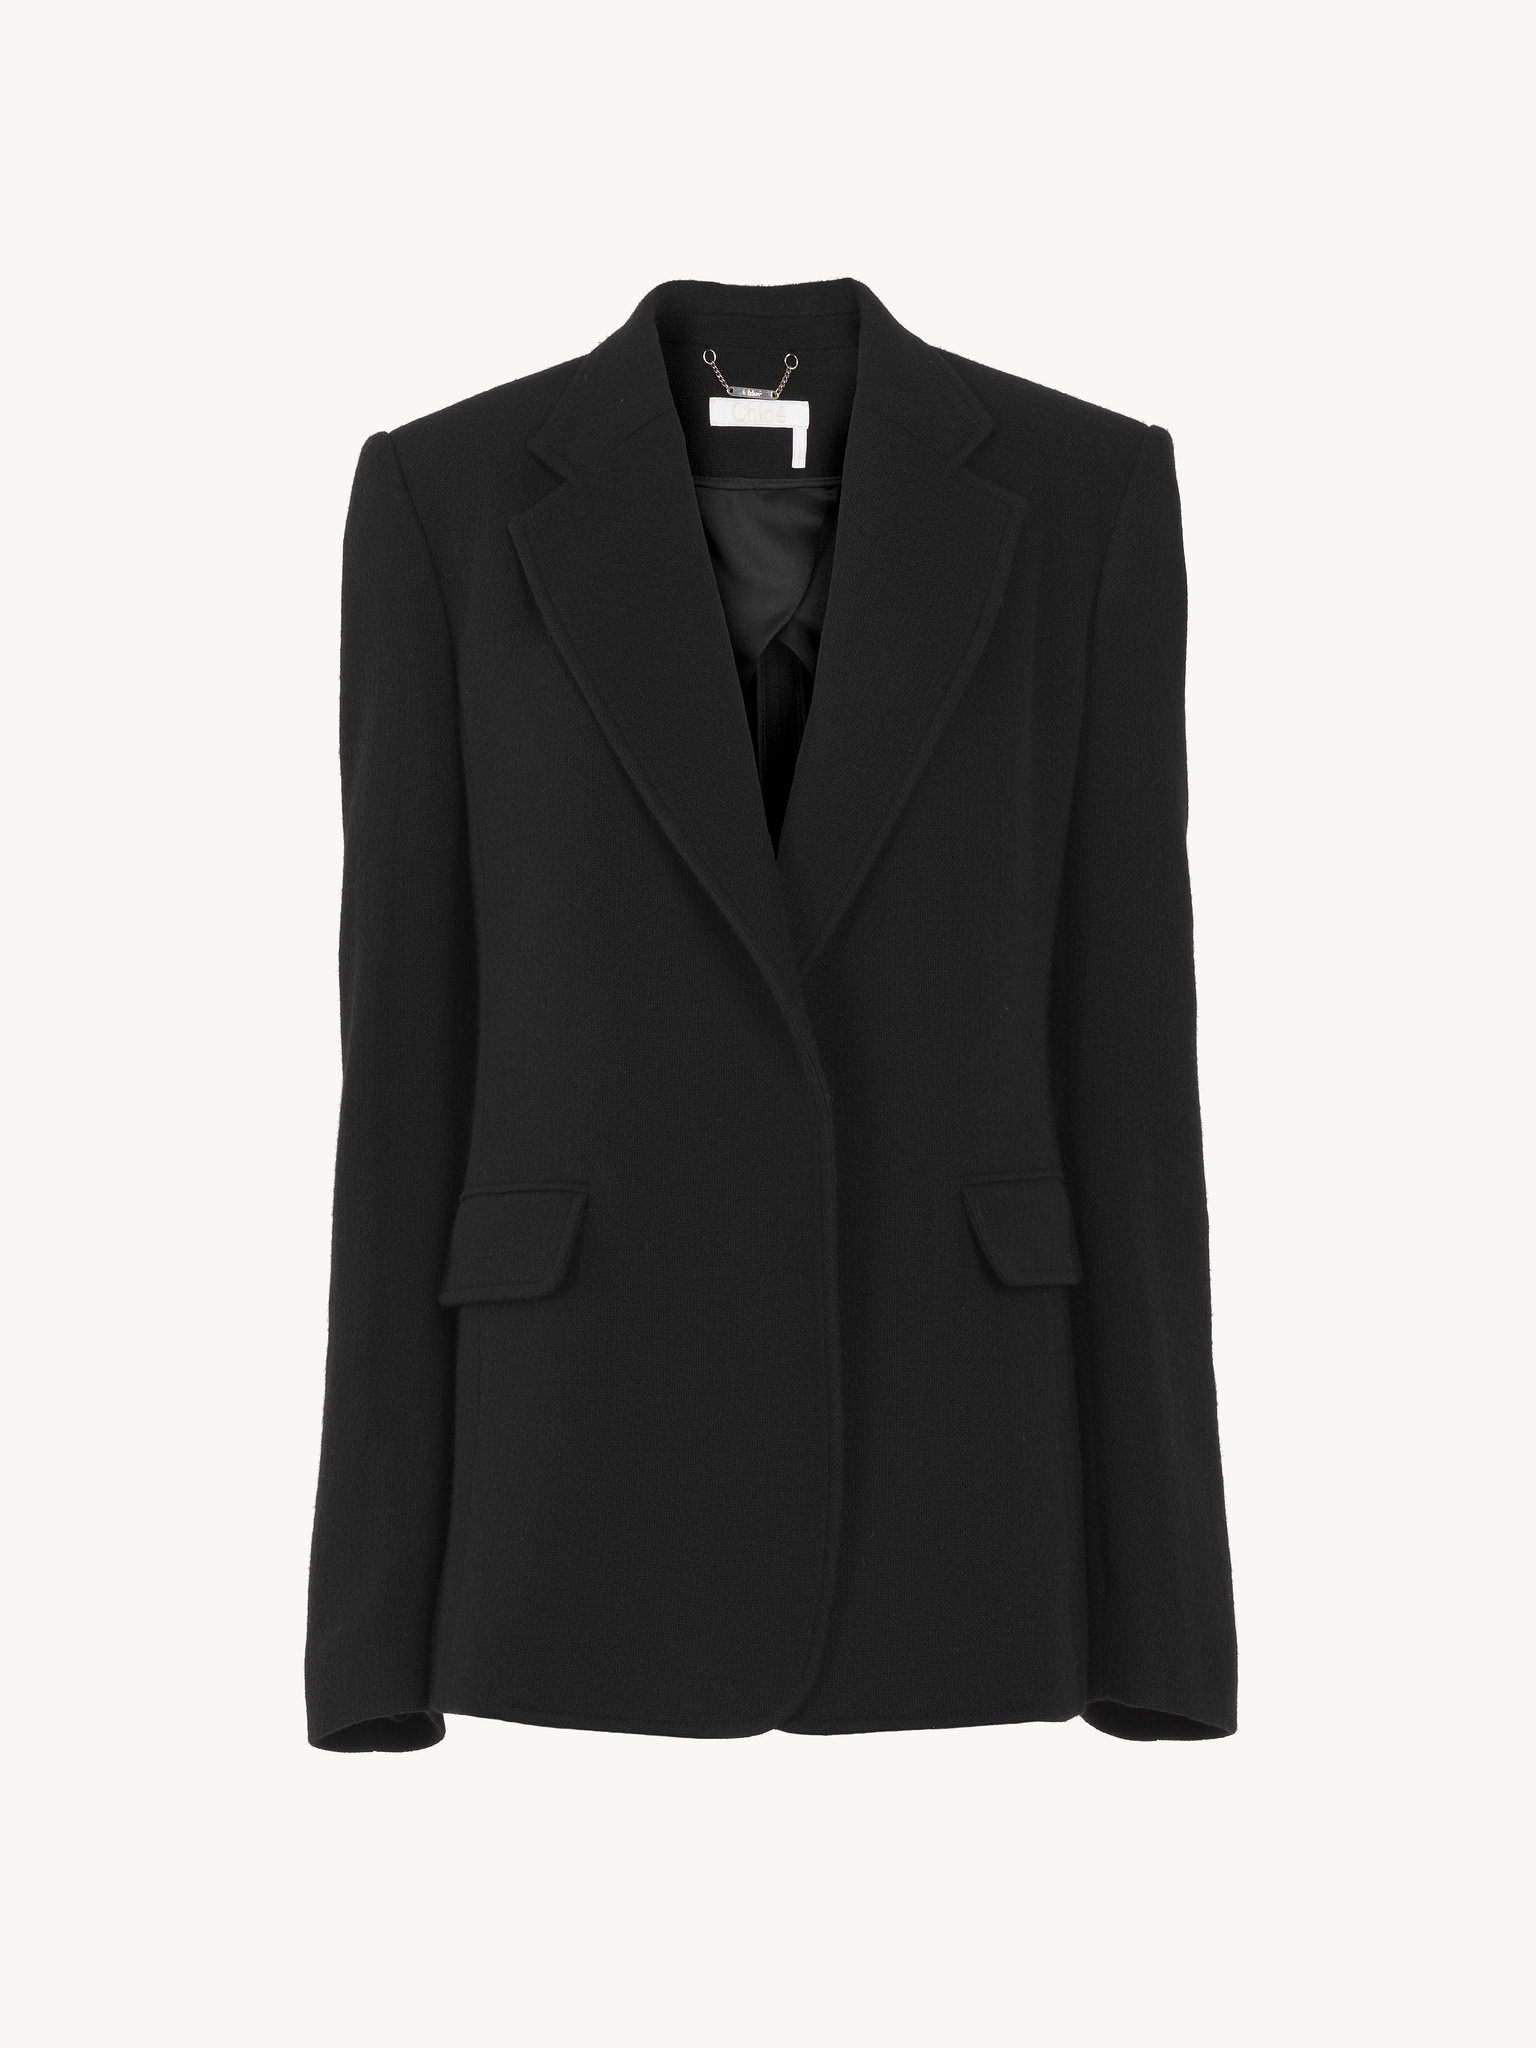 BUTTONLESS TAILORED JACKET - 3